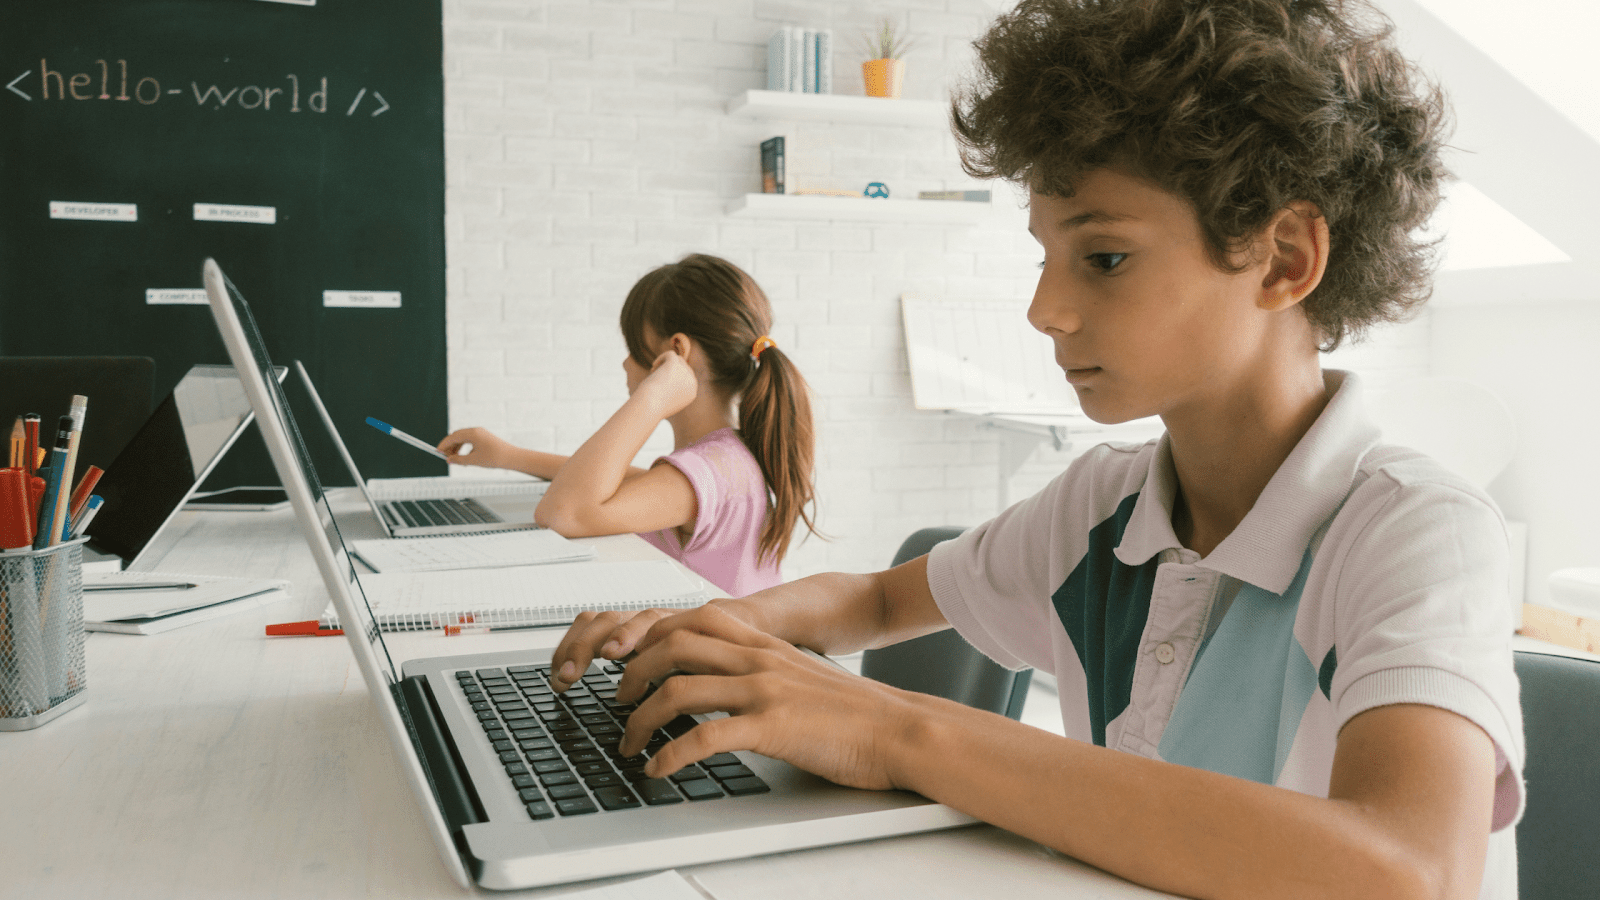 Boy coding at a laptop with girl coding in background